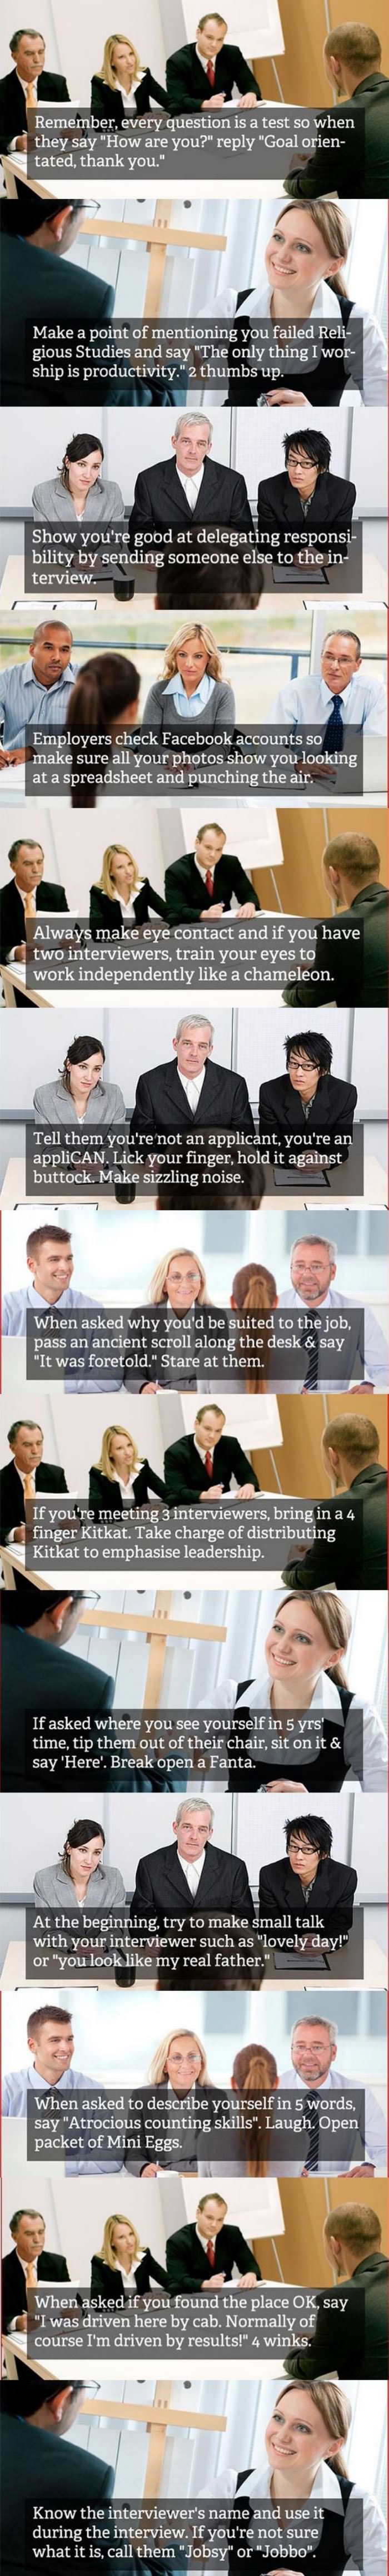 interview tips funny picture